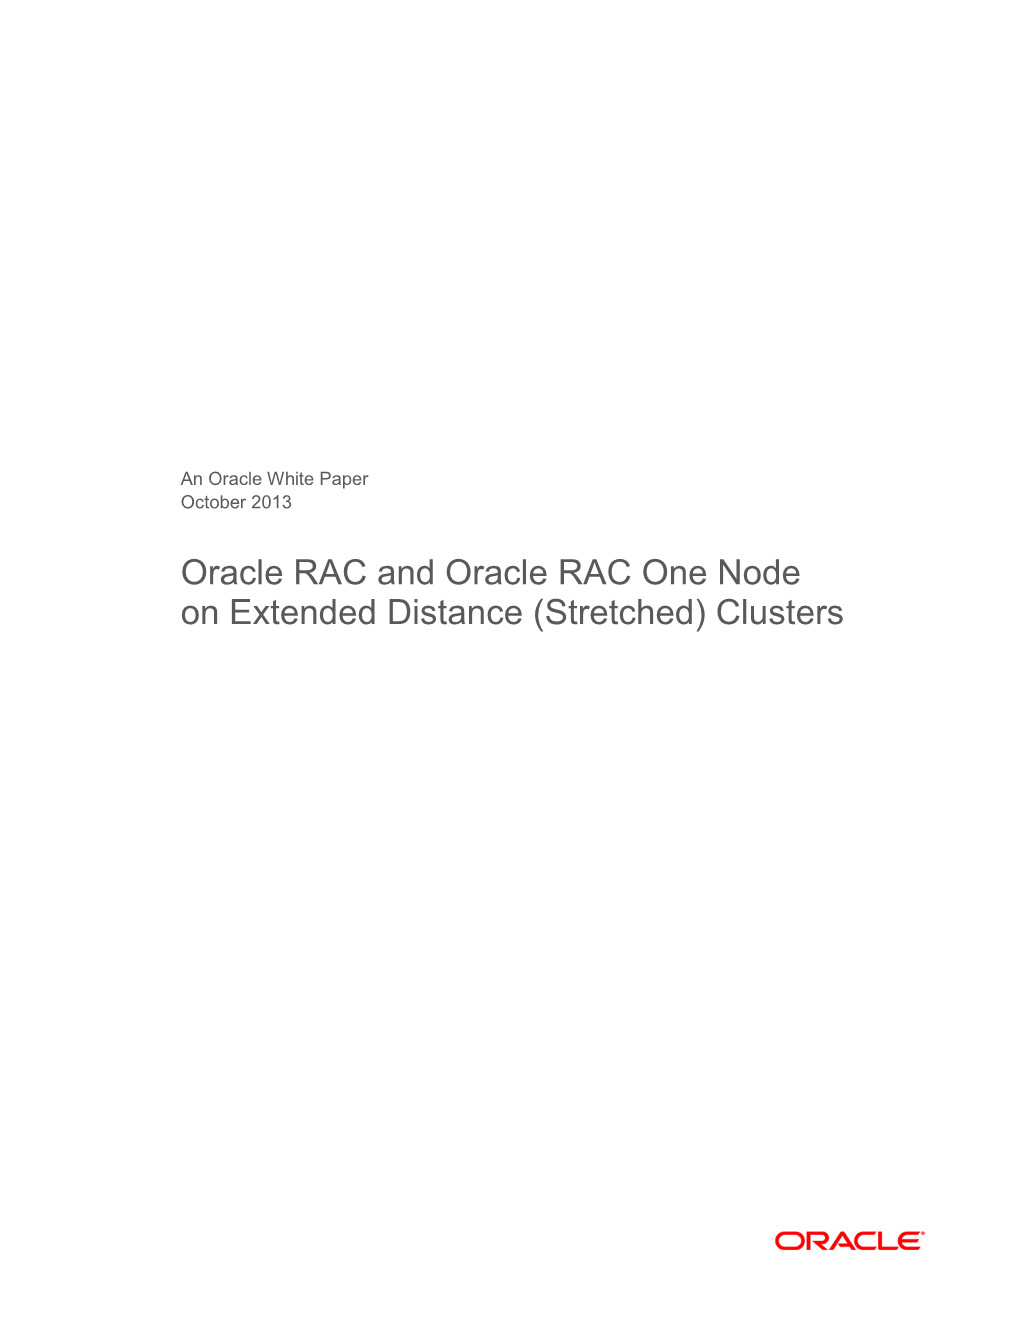 Oracle RAC One Node on Extended Distance (Stretched) Clusters